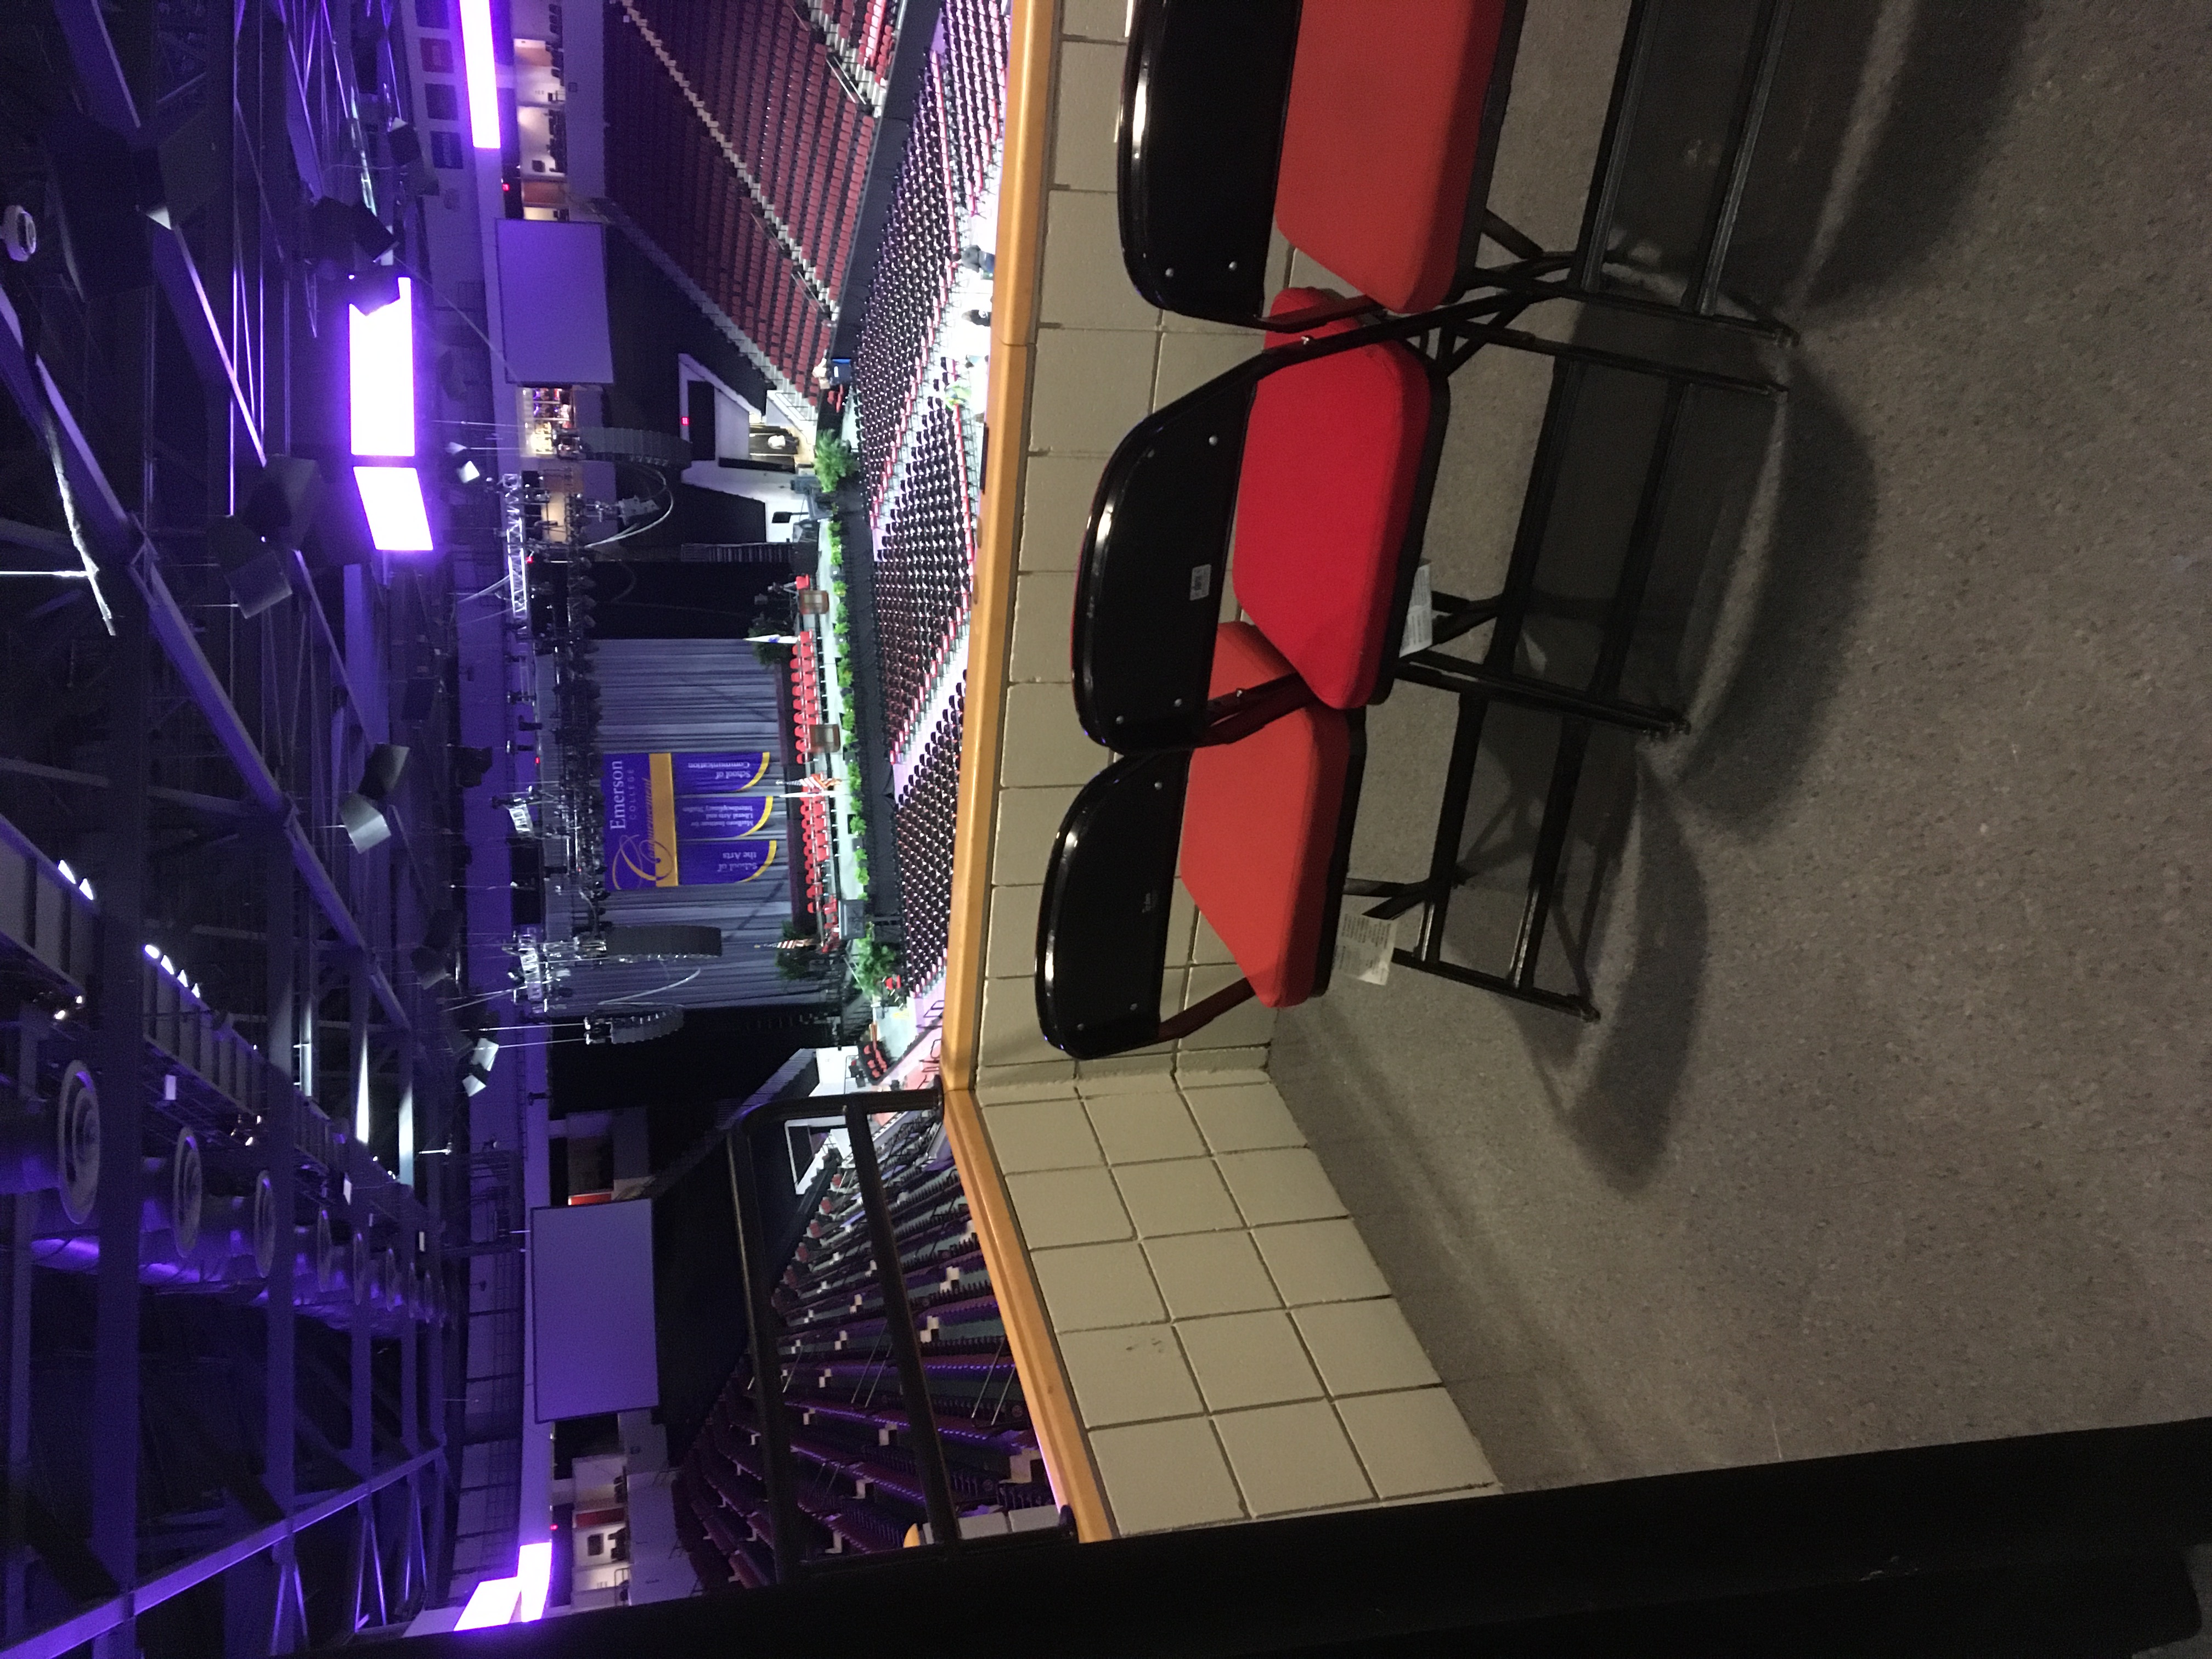 A photo of the accessible seating at Agganis Arena overlooking the ceremony floor